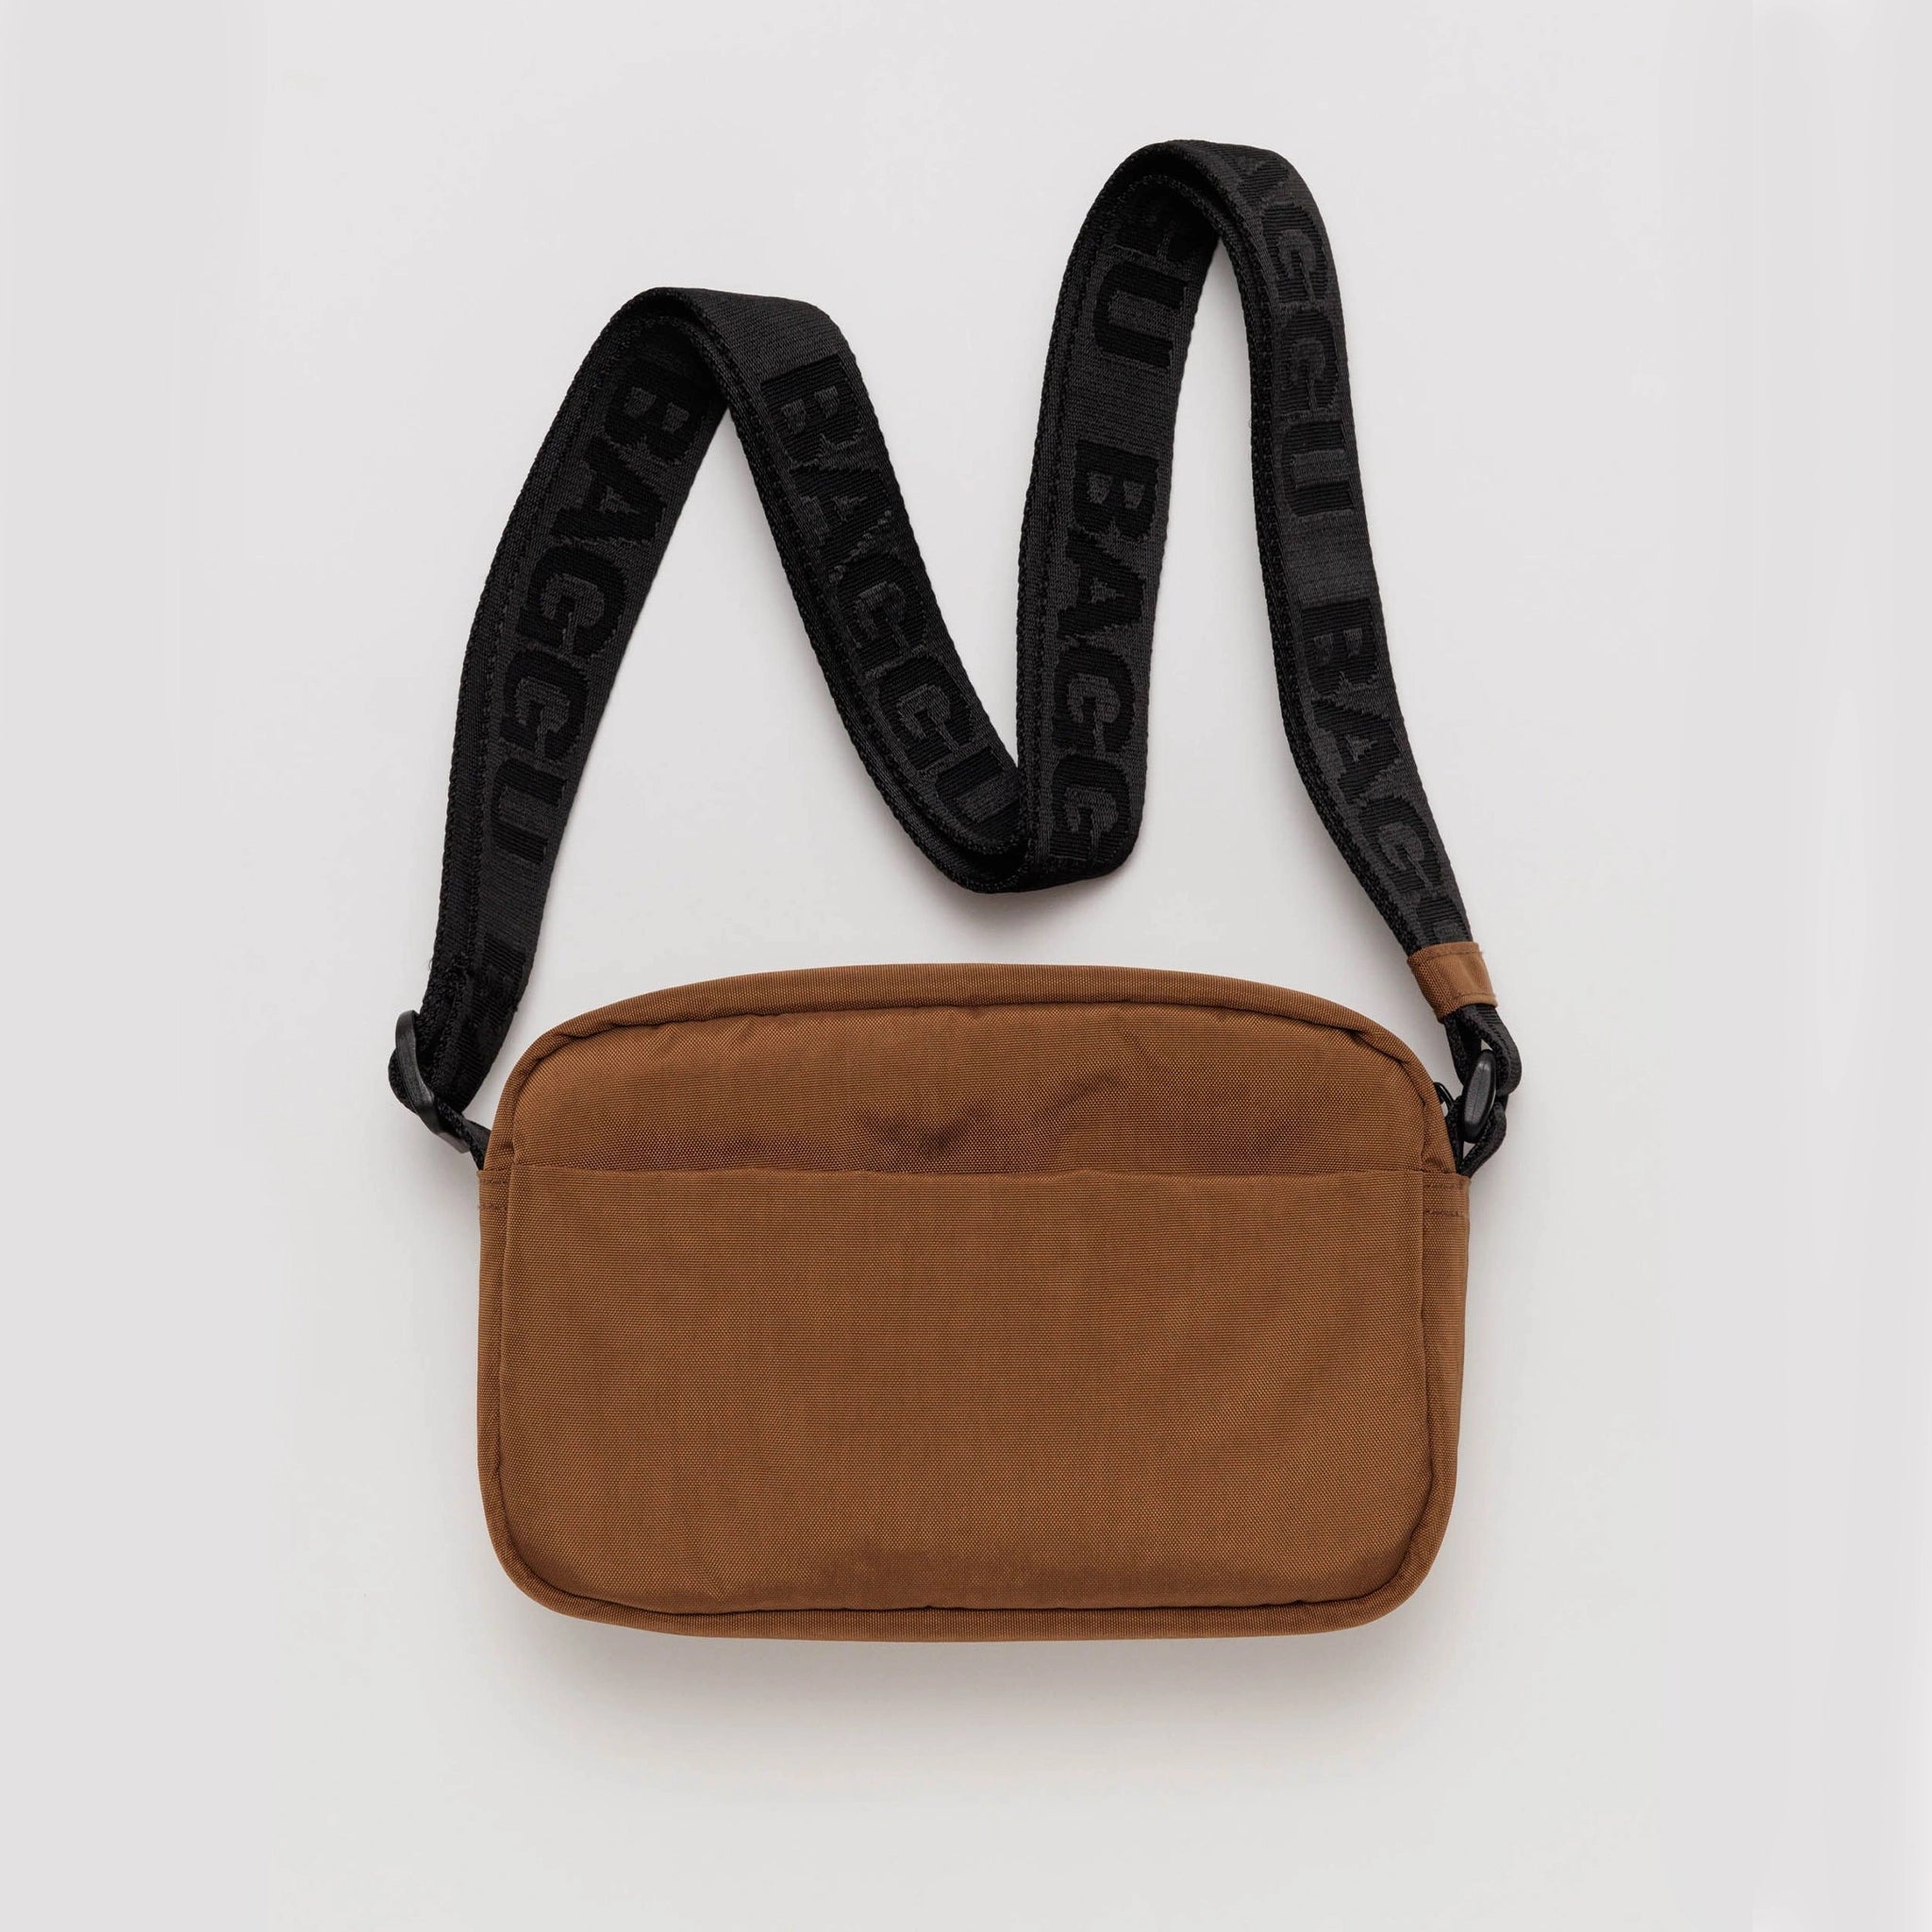 On a white background is a brown rectangle crossbody bag with a black strap.